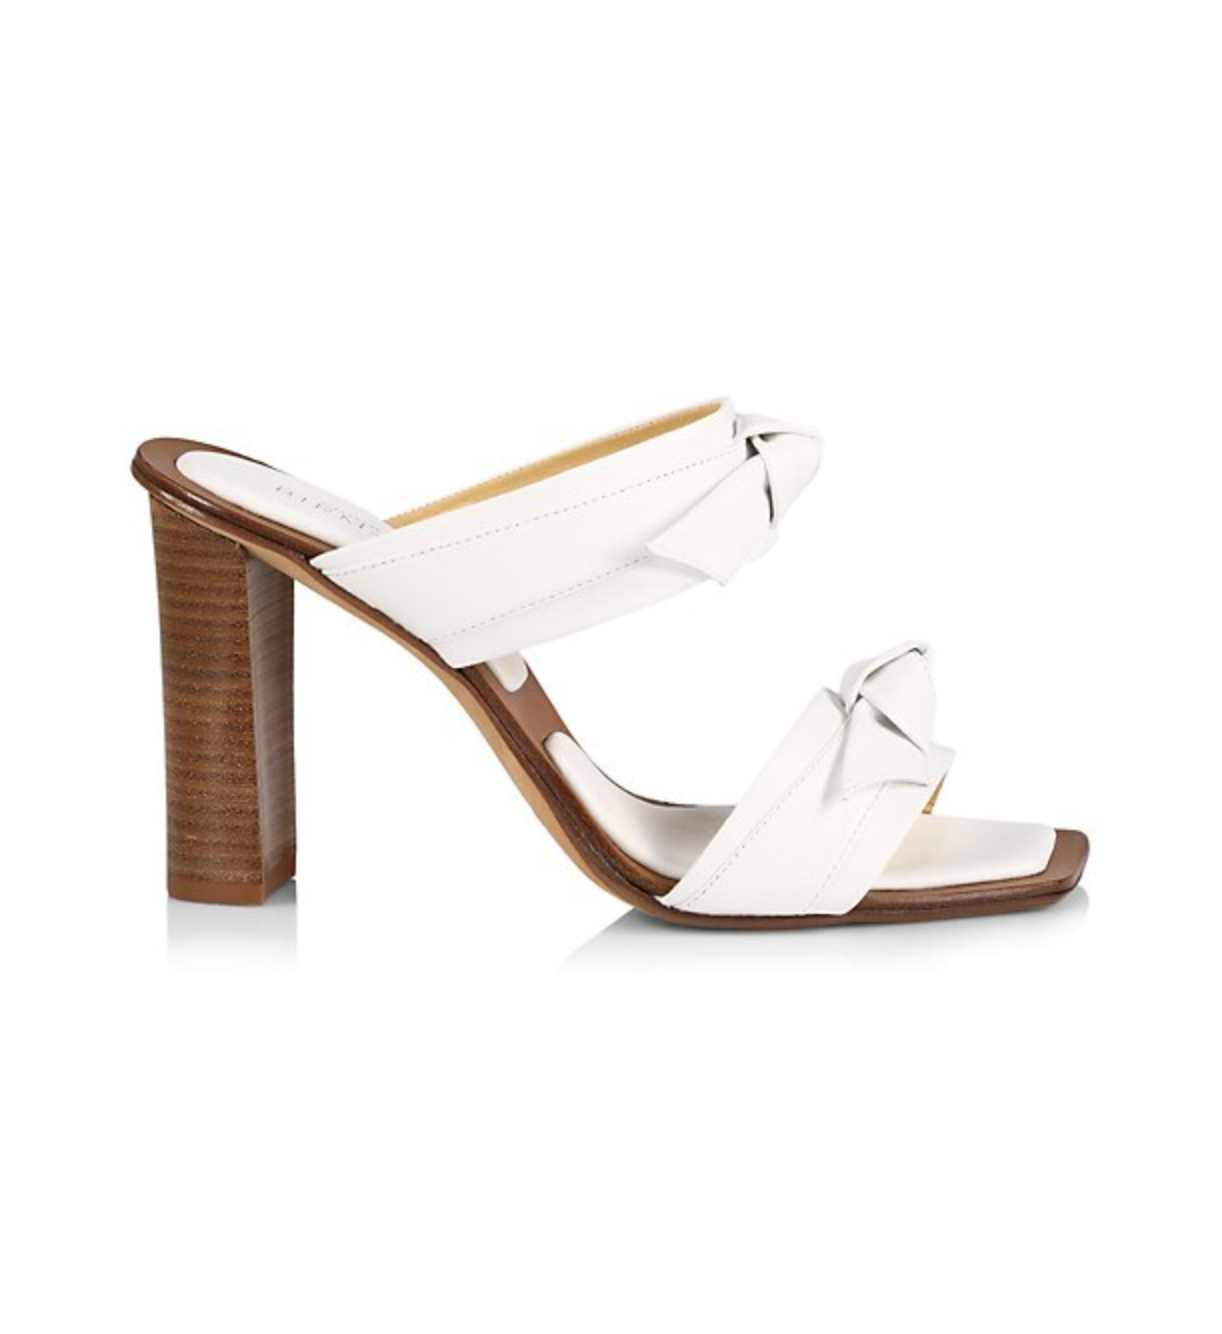 Clarita Padded 90 Leather Block-Heel Sandals in White with Brown Heels